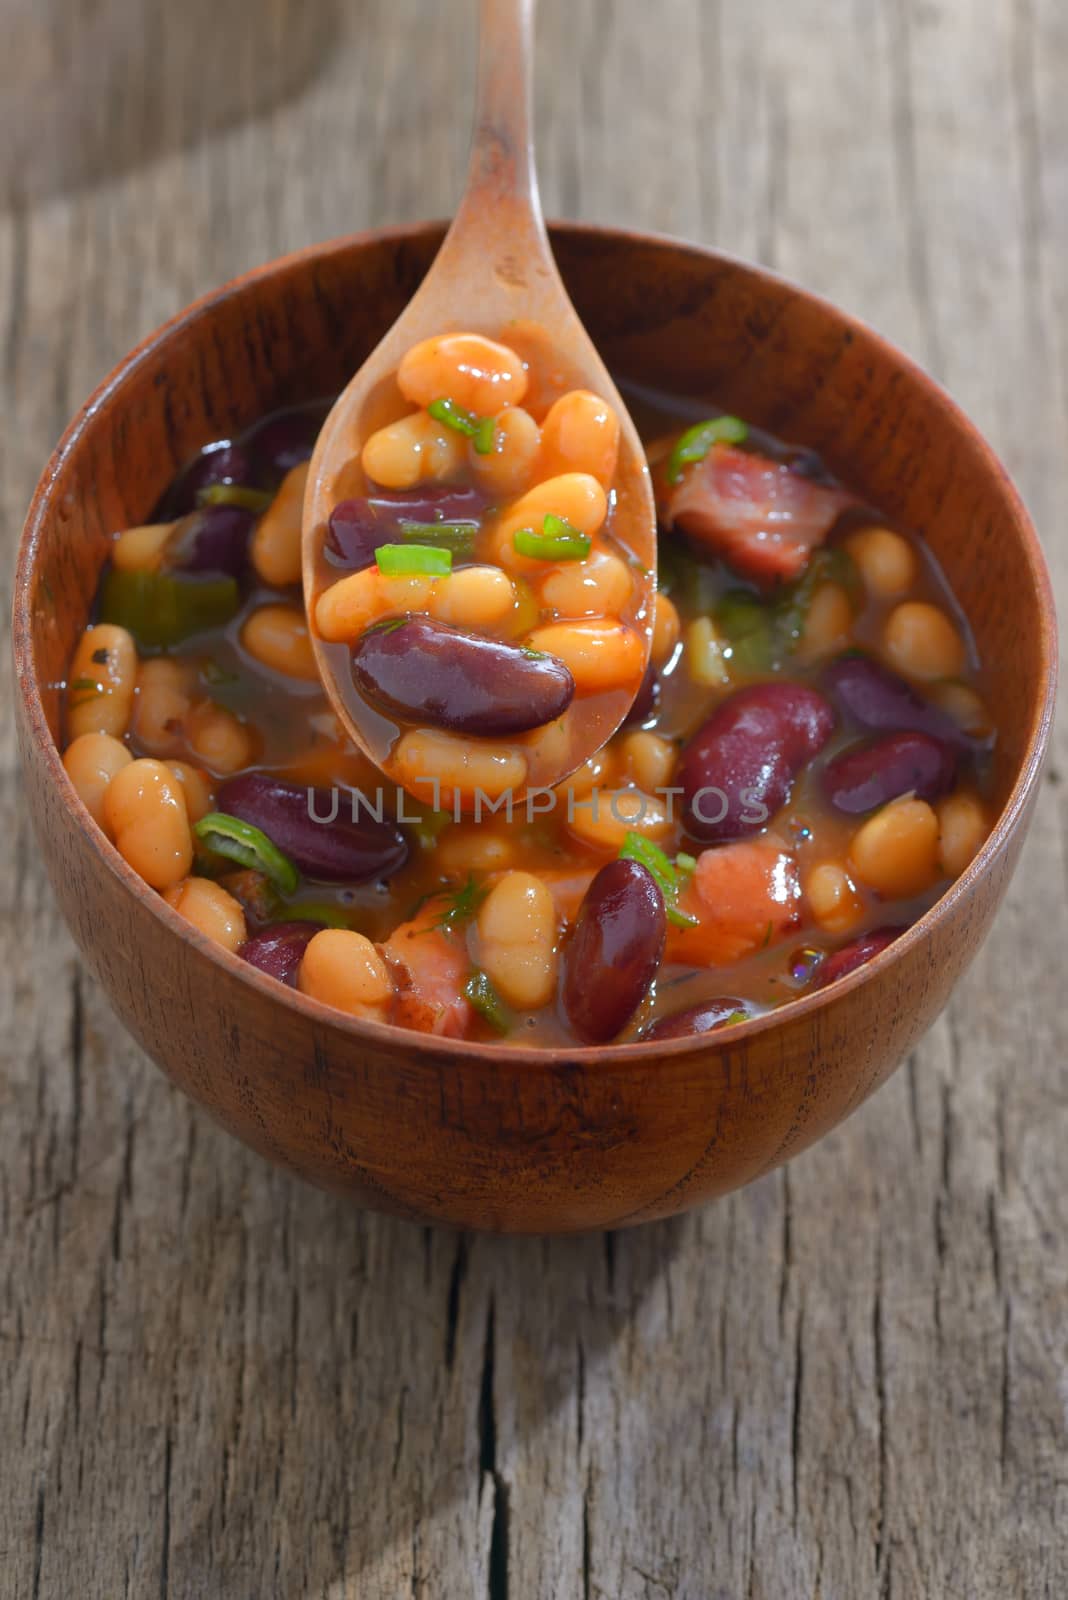 Two types of cooked beans on wooden table